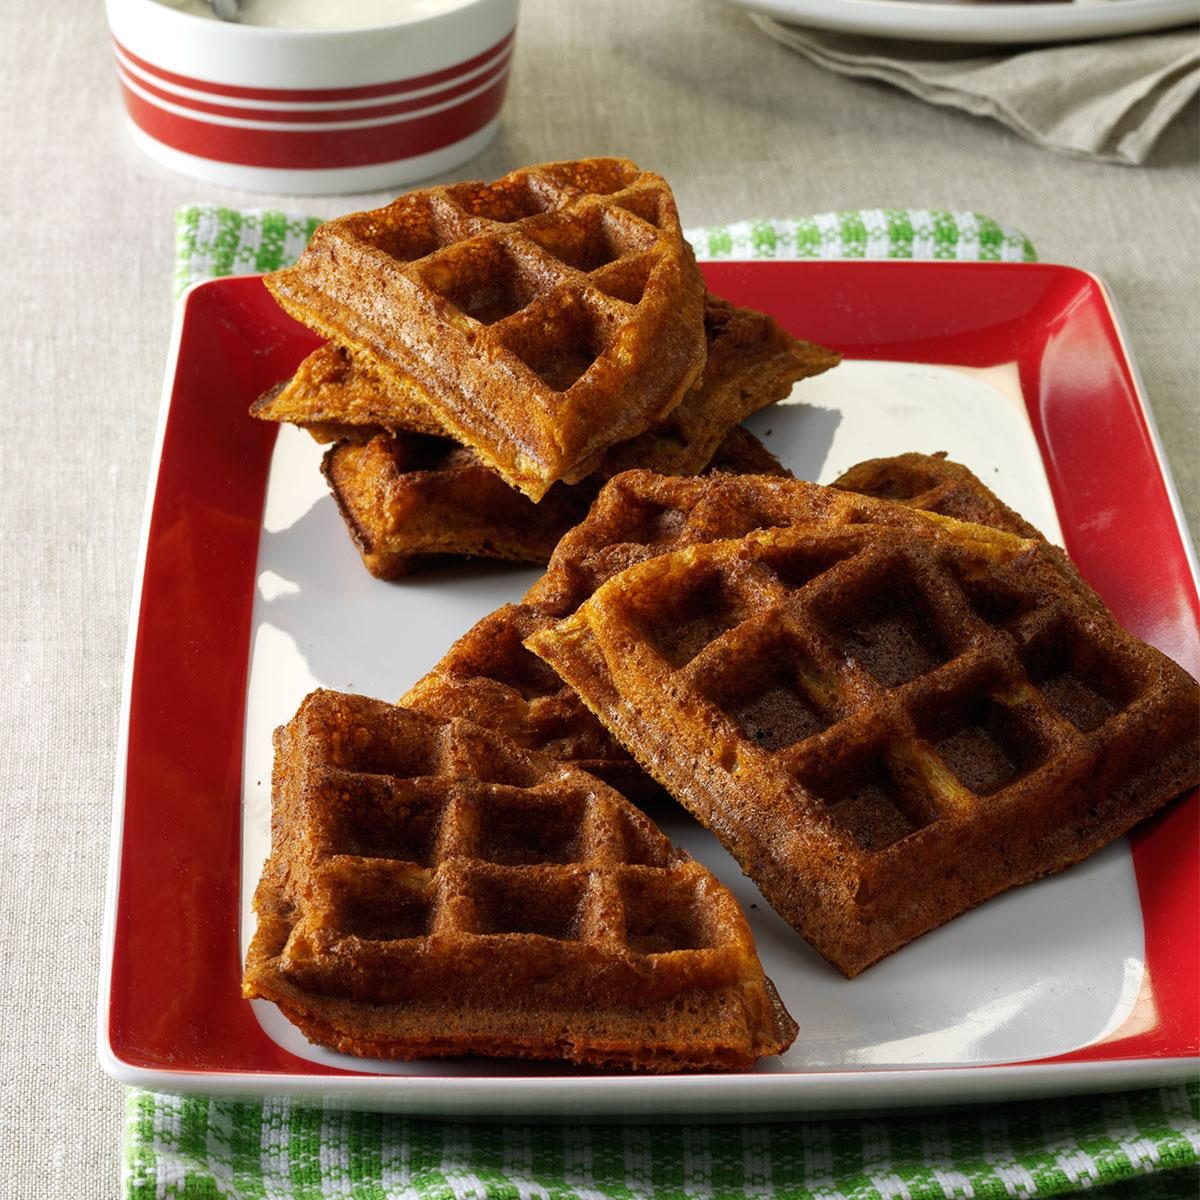 Ready to make your mornings brighter and your breakfasts more delicious  with waffle maker